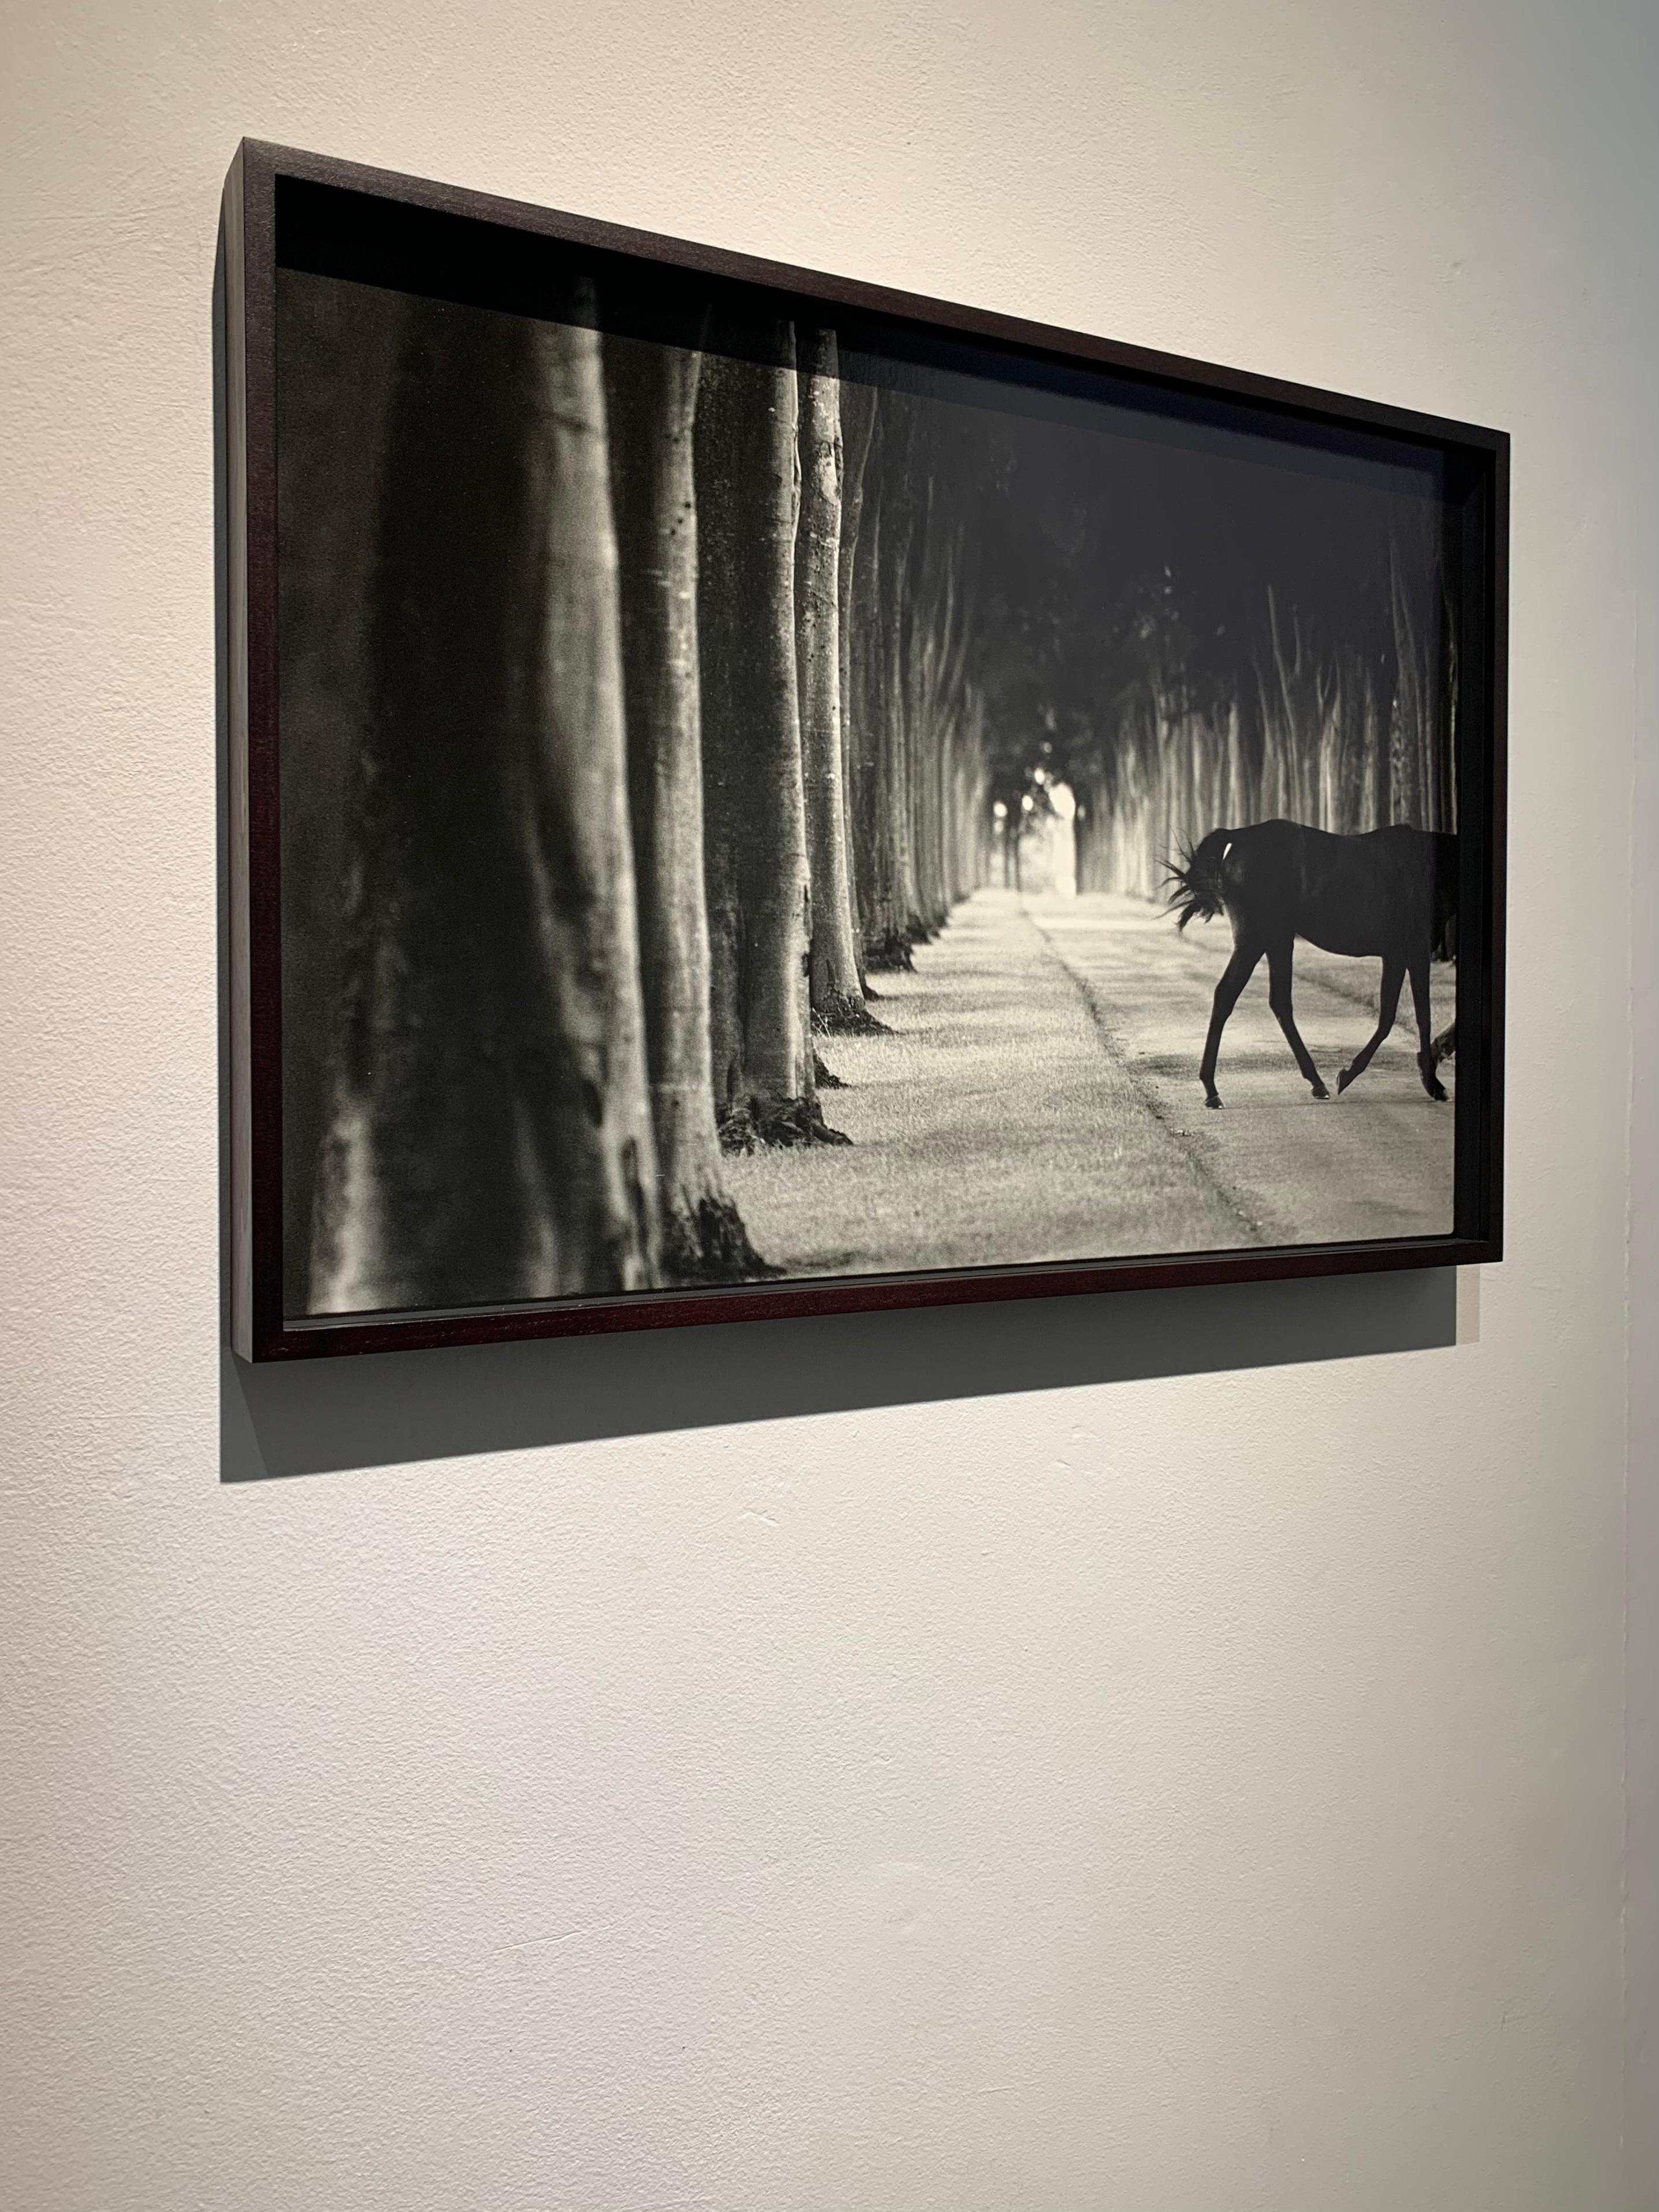 Kabool, ‘Avenue of Trees’, Horse Exit, Black and White landscape and a stallion For Sale 3